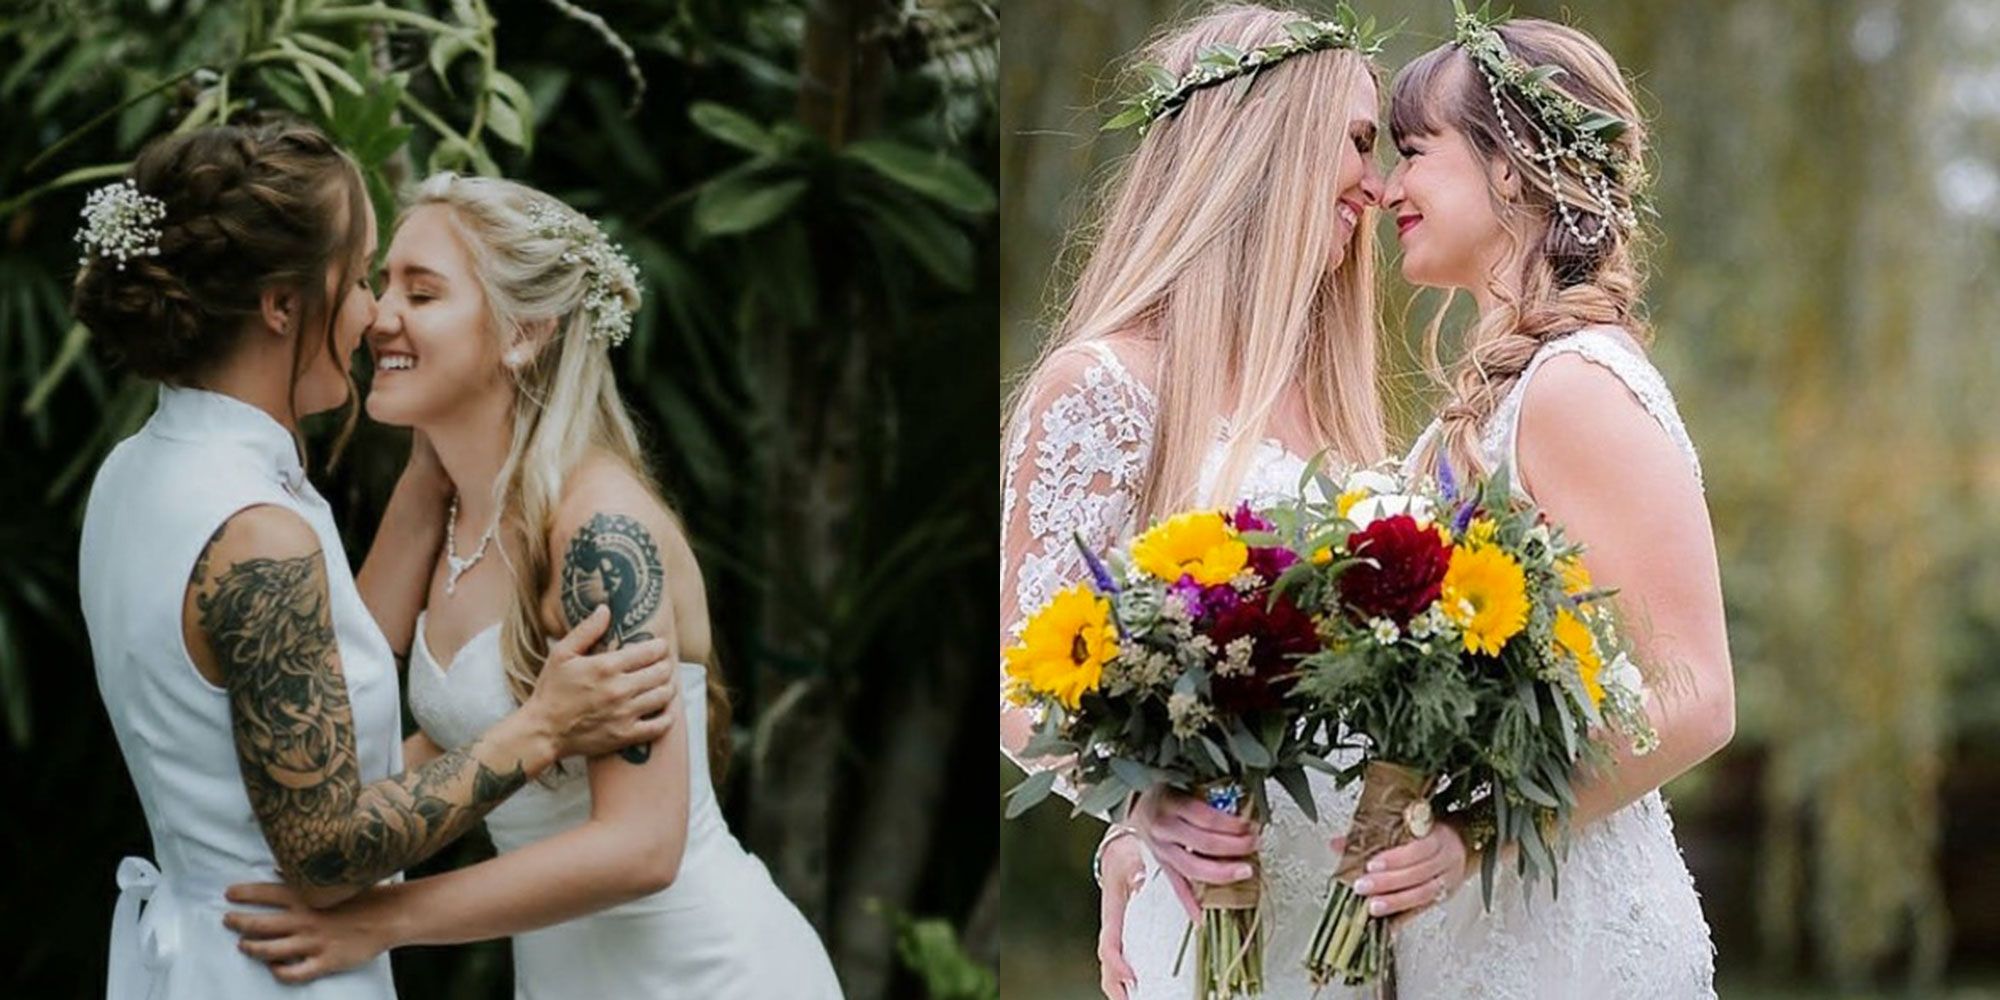 Lesbian bridal magazine Dancing With Her has launched and its stunning